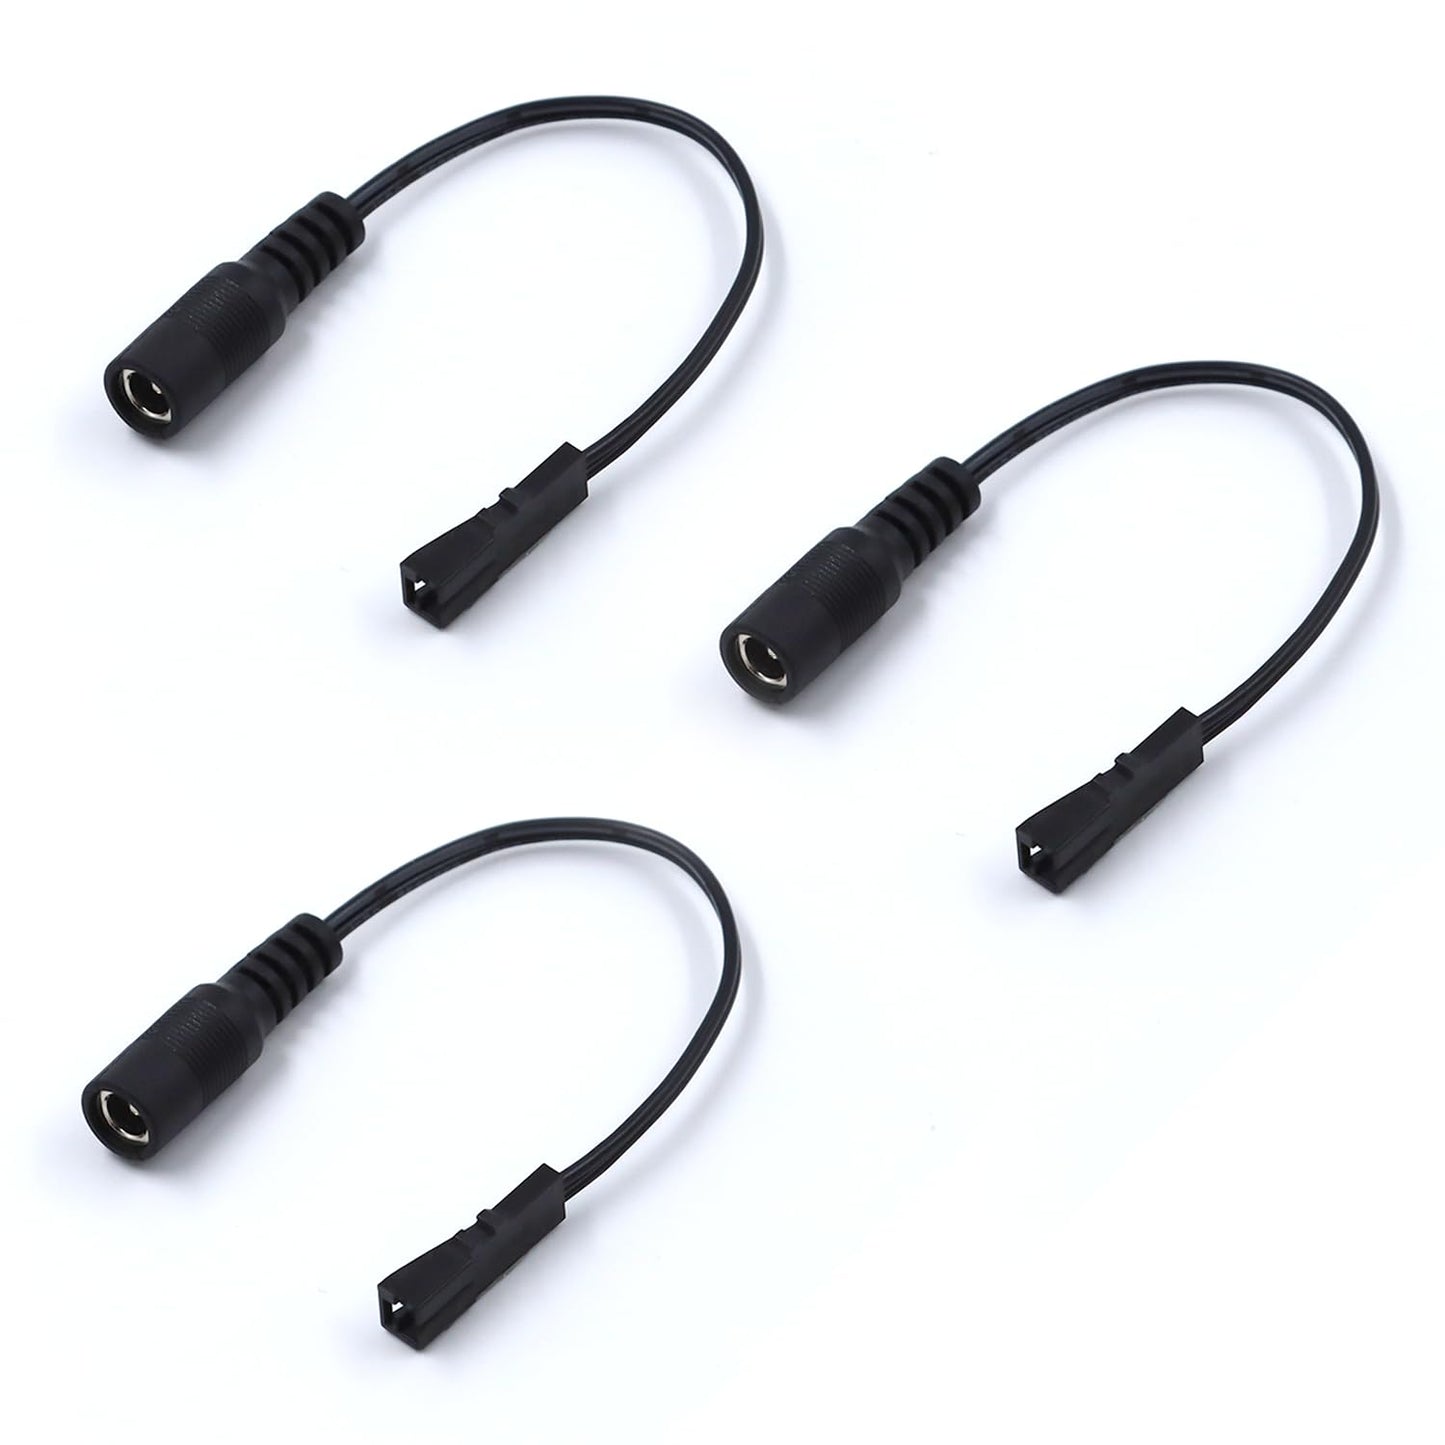 Black Adapter Cable 3 Pack Female Plug and JST 2 Pin L815 Female Plug for Connection LED strip lights and Led driver with DC plug